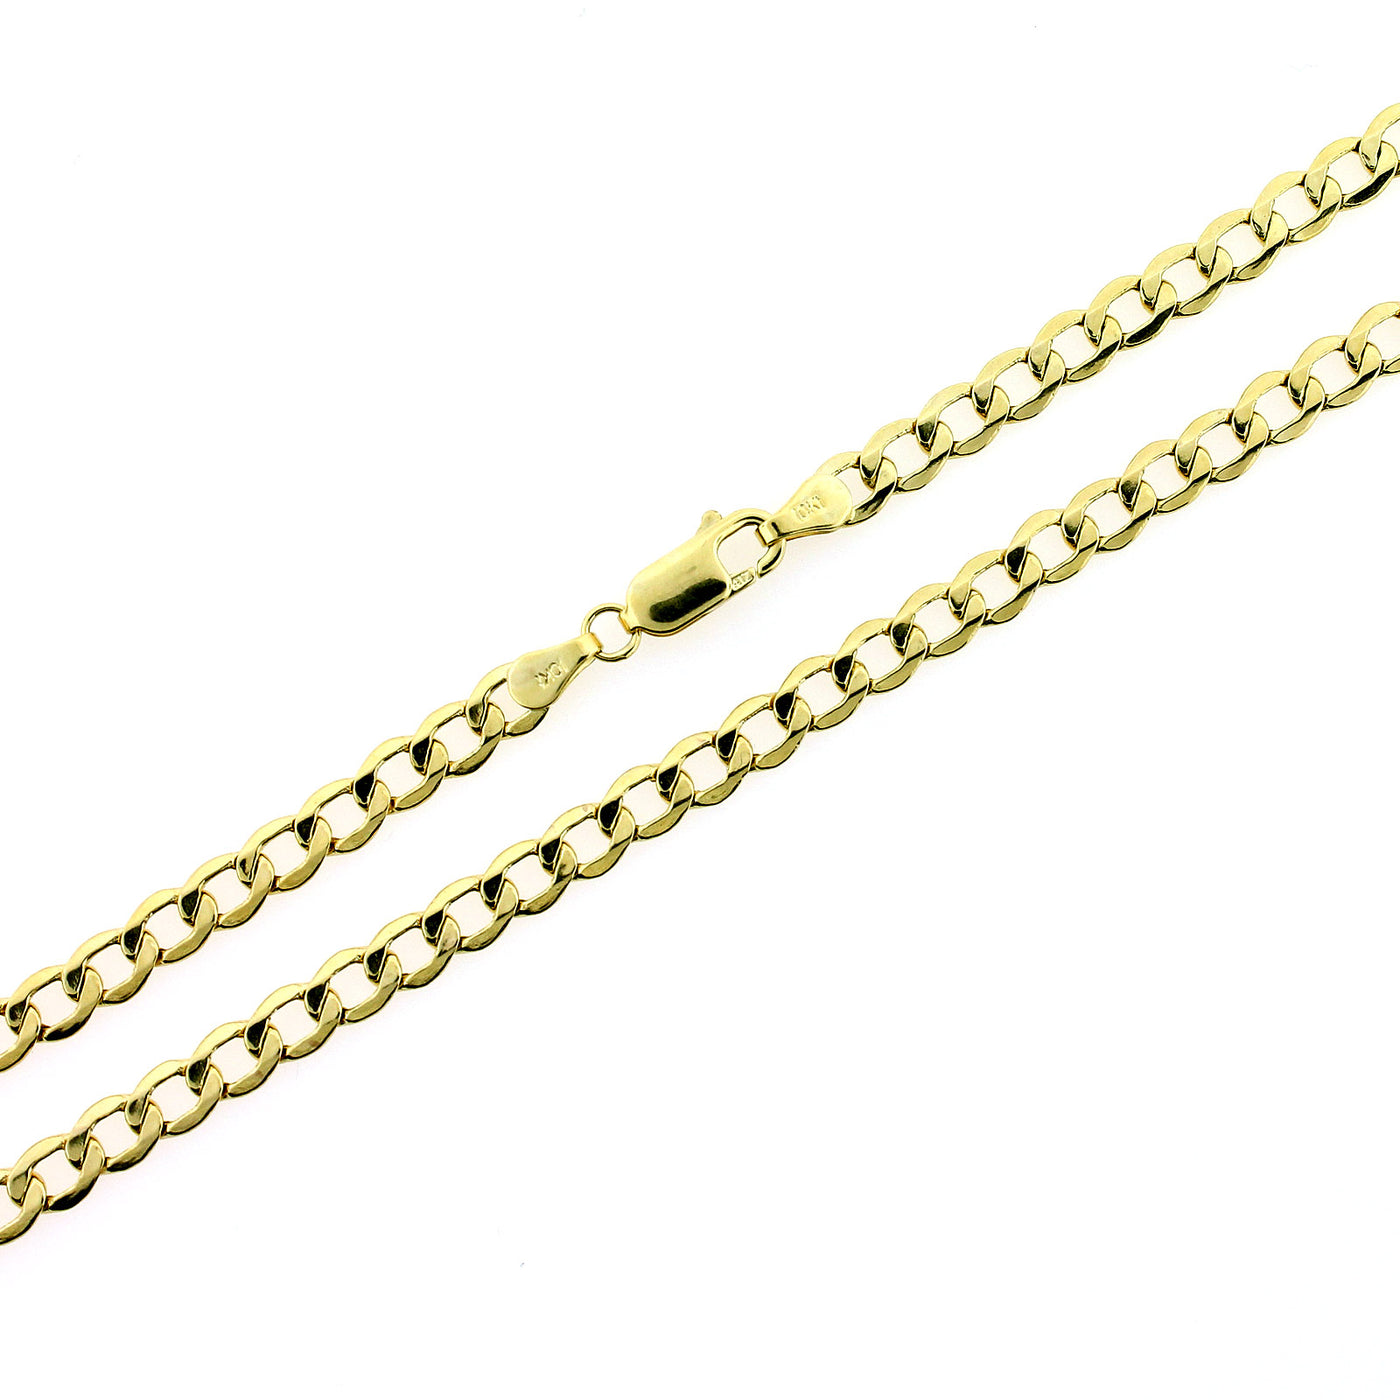 10K Solid Yellow Gold Men's Cuban Curb Link Chain Necklace 3.5MM 16" 18" 20" 22" 24" 26"